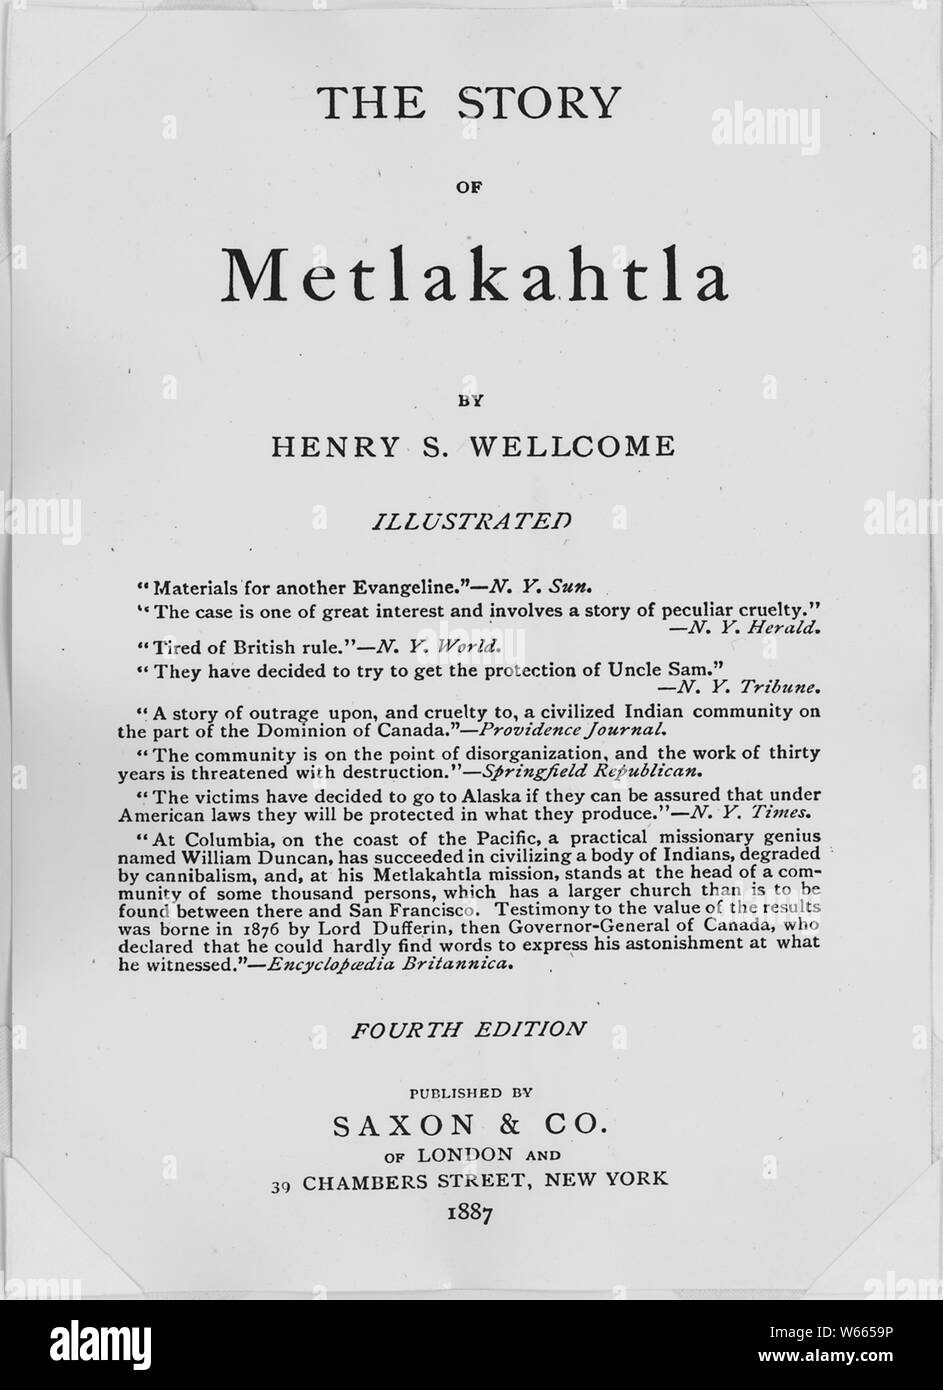 Henry S. Wellcome, The Story of Metlakahtla, 4th. edn., London and New York, 1887. Title page. Stock Photo